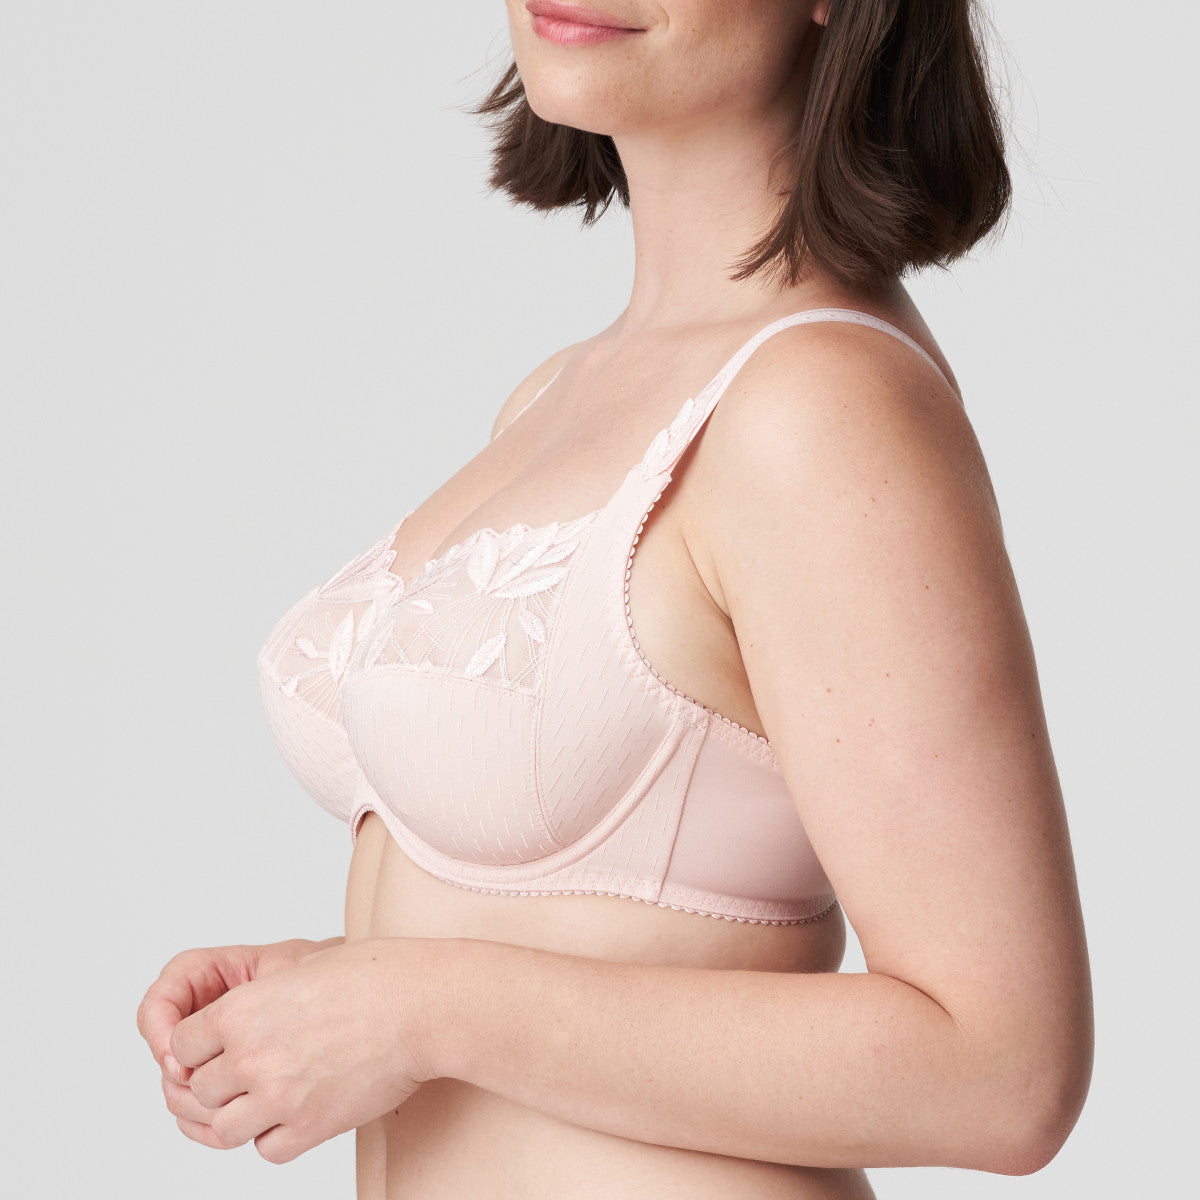 This is a fabulously stylish yet full fitting and supportive bra. The three-section cups have an excellent fit, yet a light look. The top of the cup has beautiful two-toned lacy embroidery that runs into the straps. The cups have the same fit as the legendary Deauville bra, offering a perfect fit.  The firm cups lift the bust while the higher side section give proper support ensuring a better uplift, especially for largest sizes.  